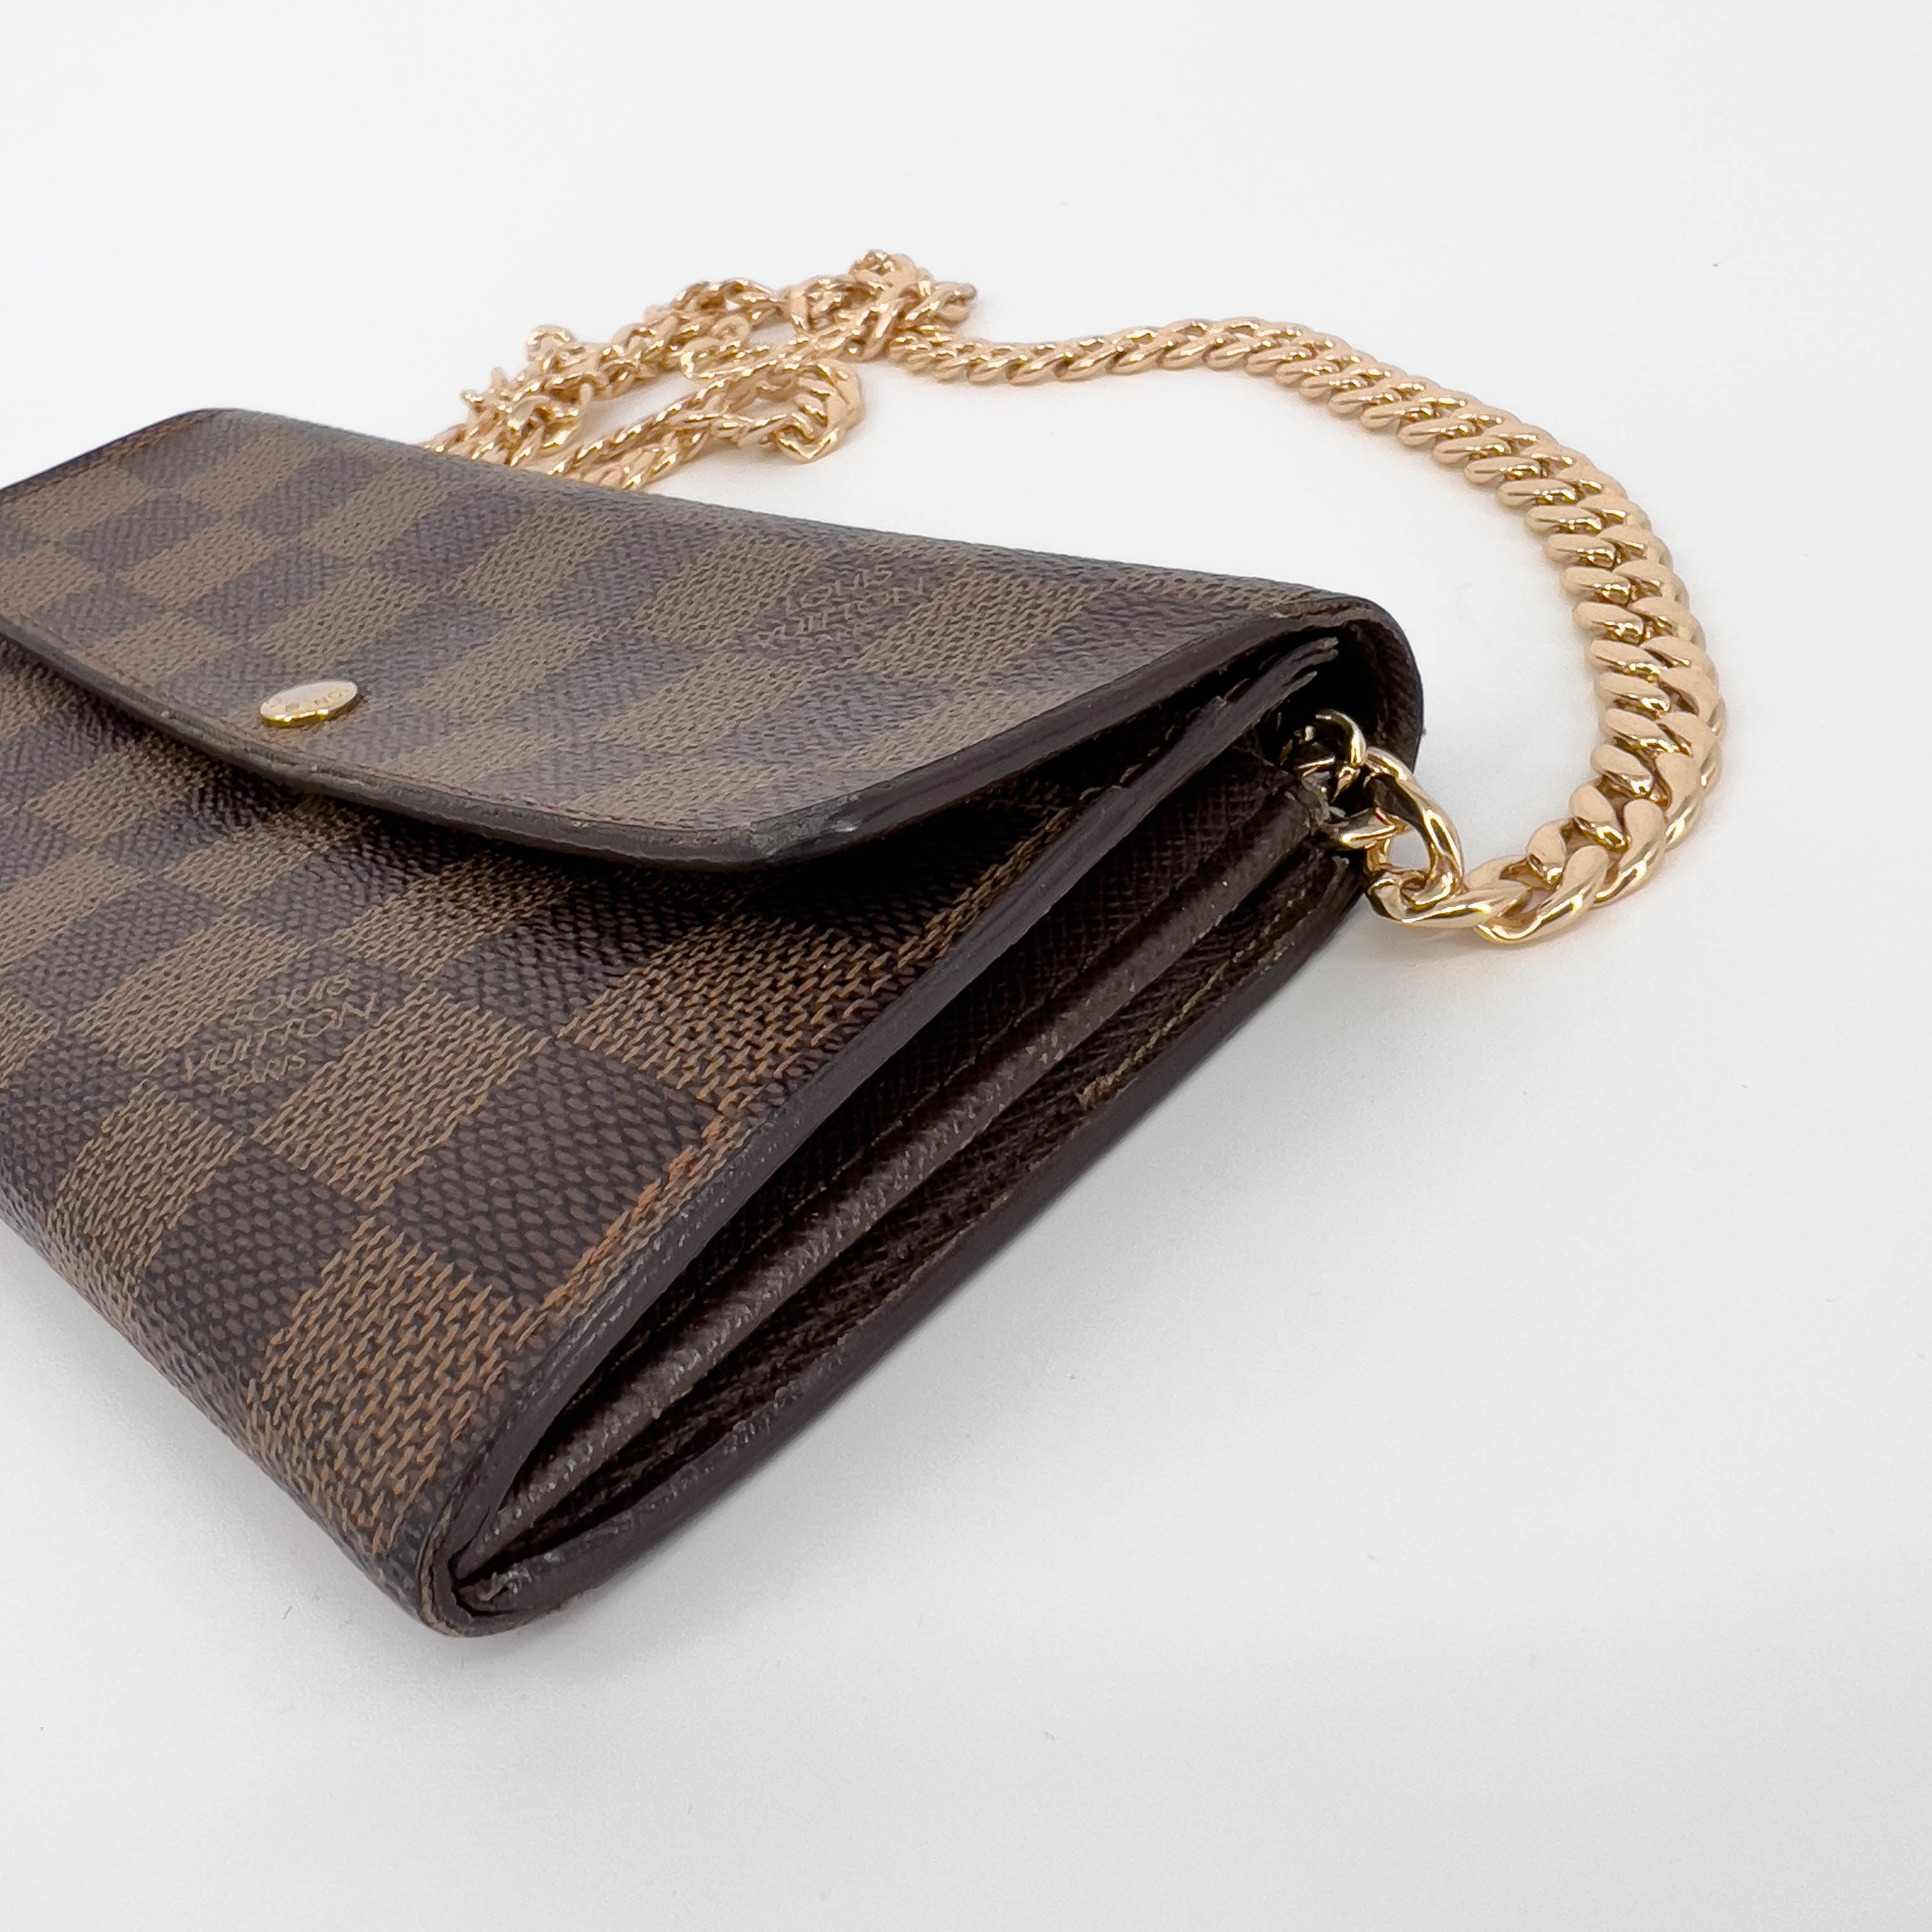 Damier Ebene Wallet with Chain